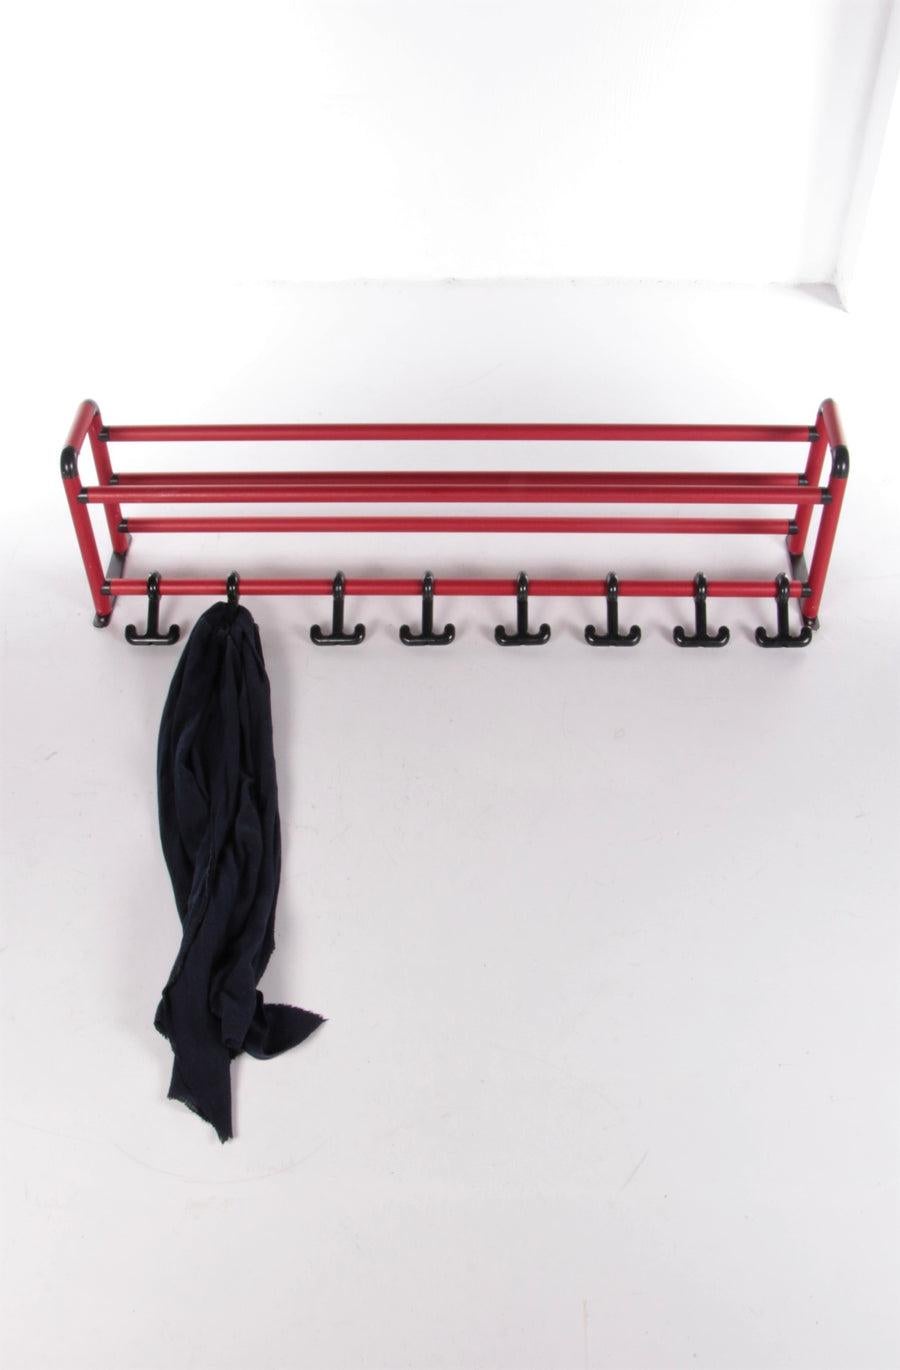 Vintage Spage Age Wall Coat Rack Made of Metal With Black Hooks,1970s

They are deep red metal tubes with two brackets at the back to hang it properly. 

This wall coat rack has always hung in a sports hall in the 1970s.

If you have a cafe, bistro